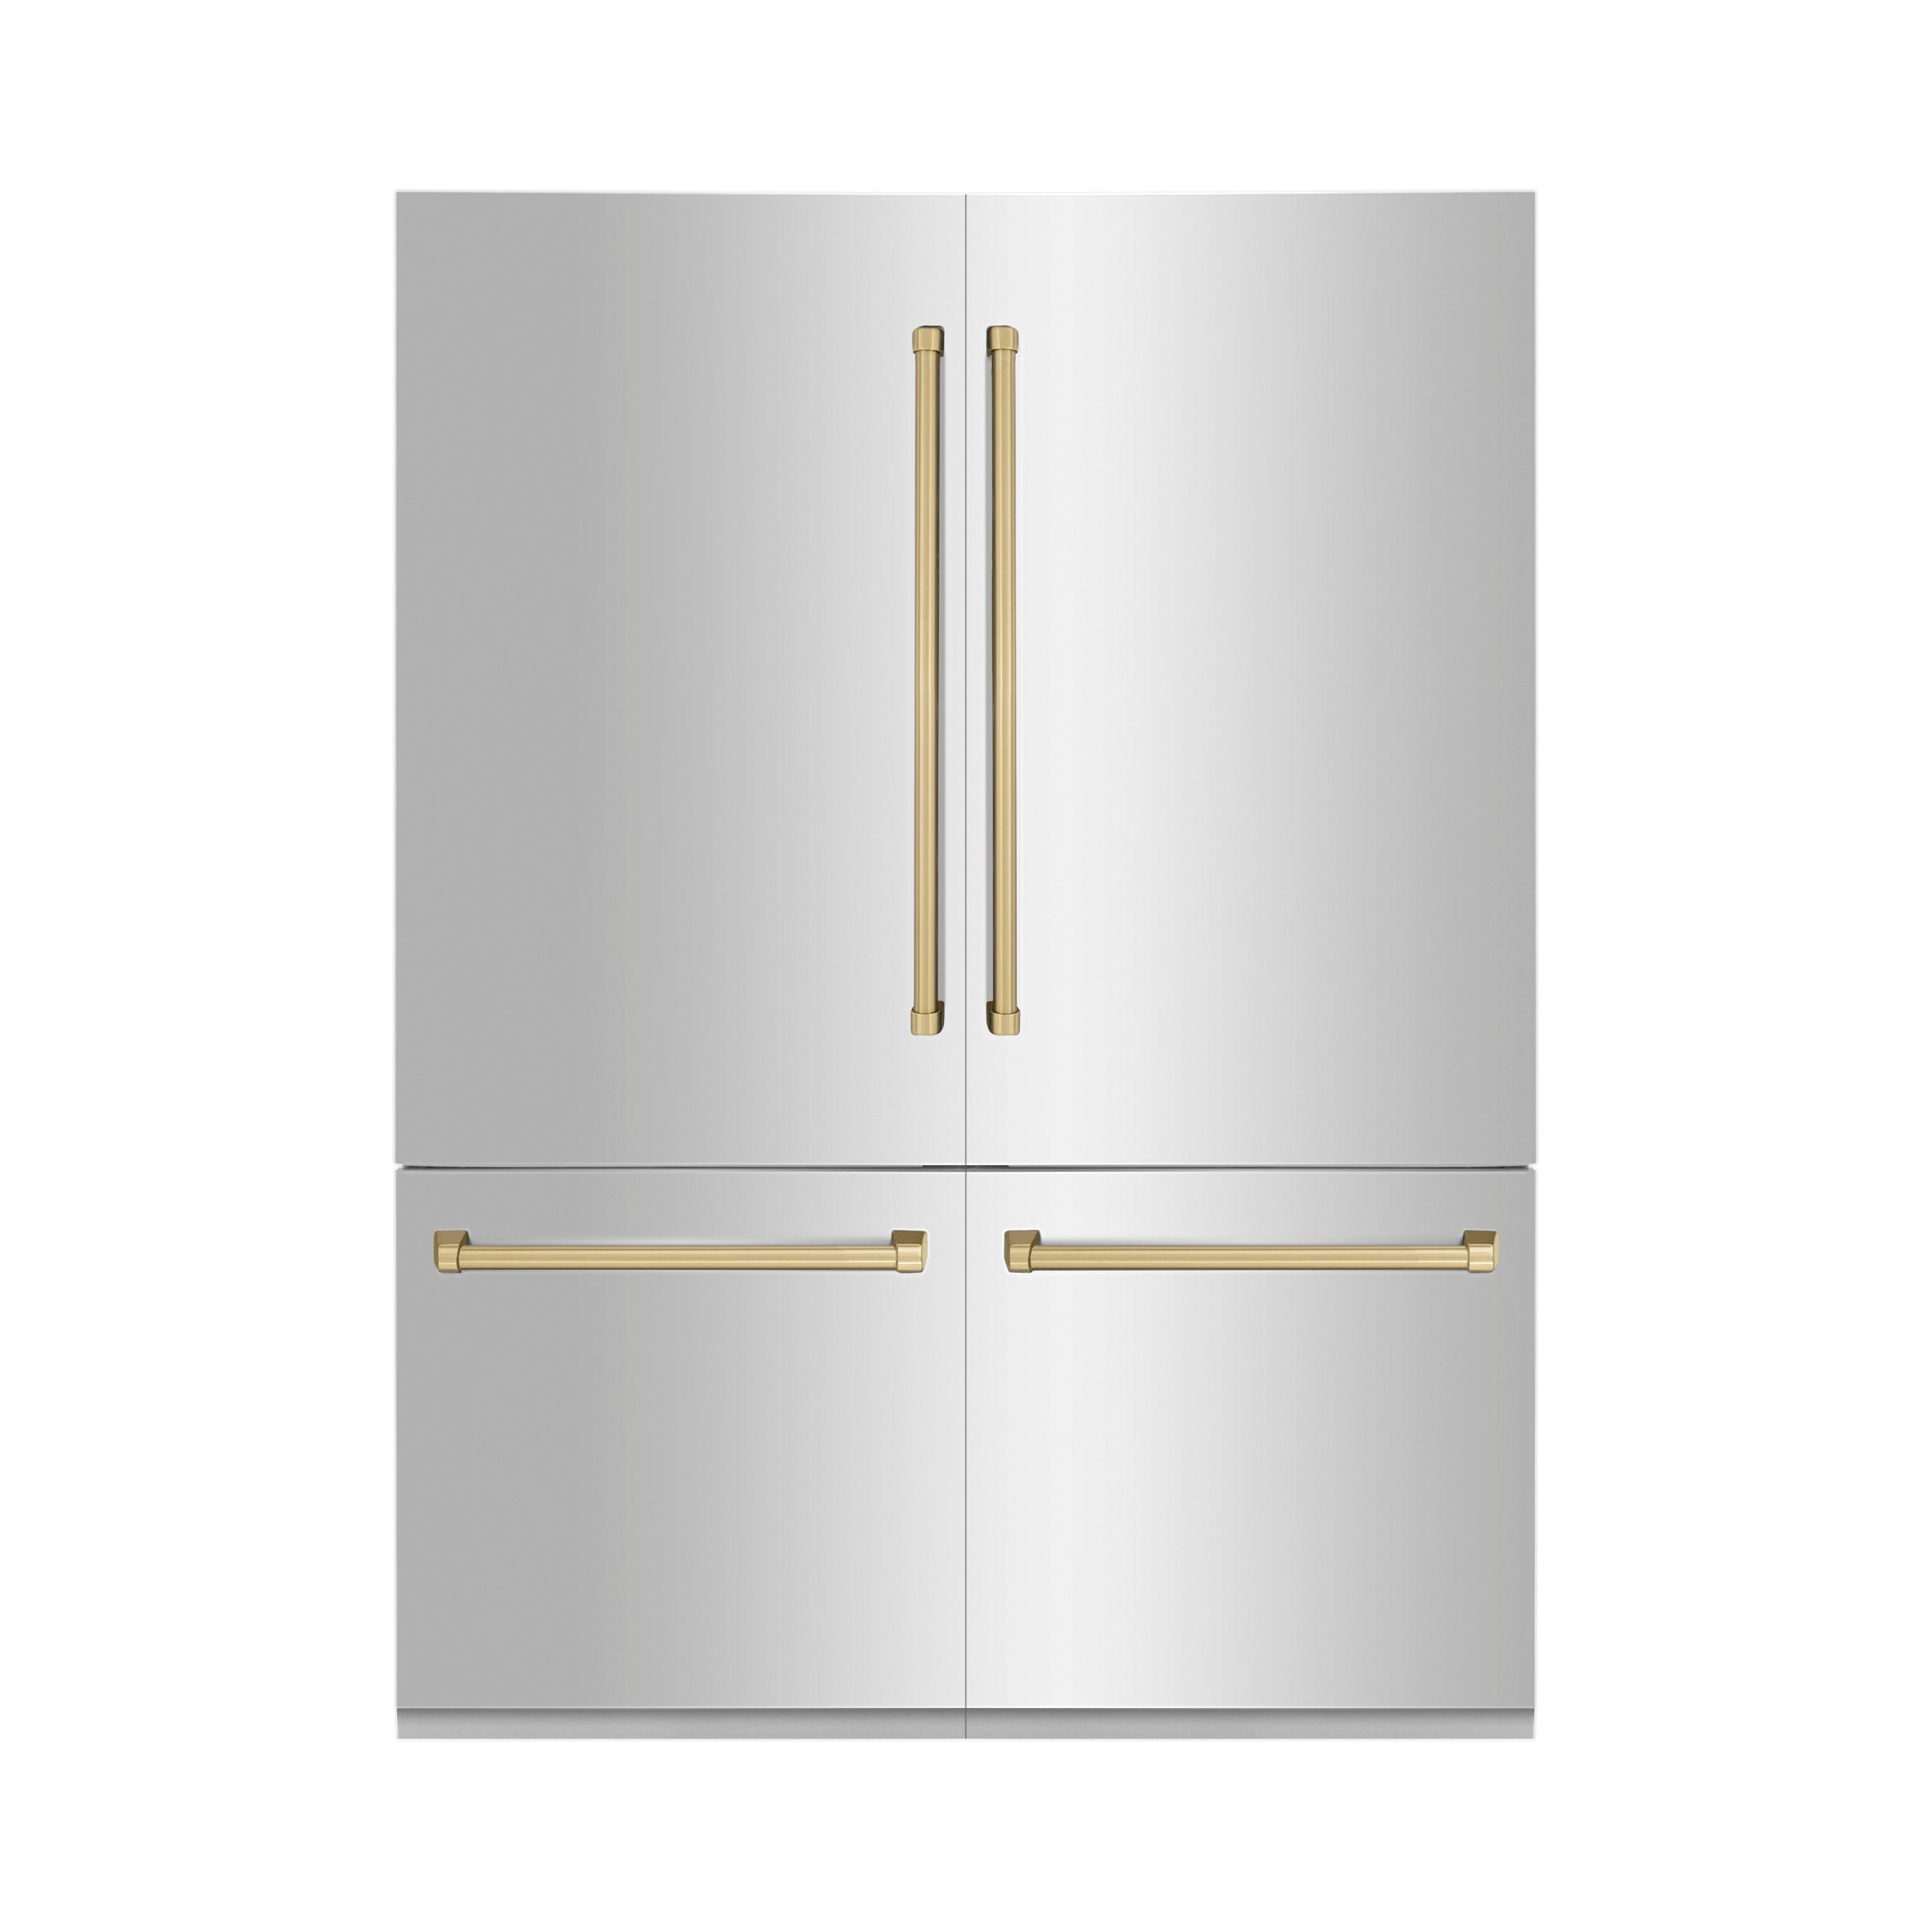 ZLINE 60" Autograph Edition 32.2 cu. ft. Built-in 4-Door French Door Refrigerator with Internal Water and Ice Dispenser in Stainless Steel with Champagne Bronze Accents